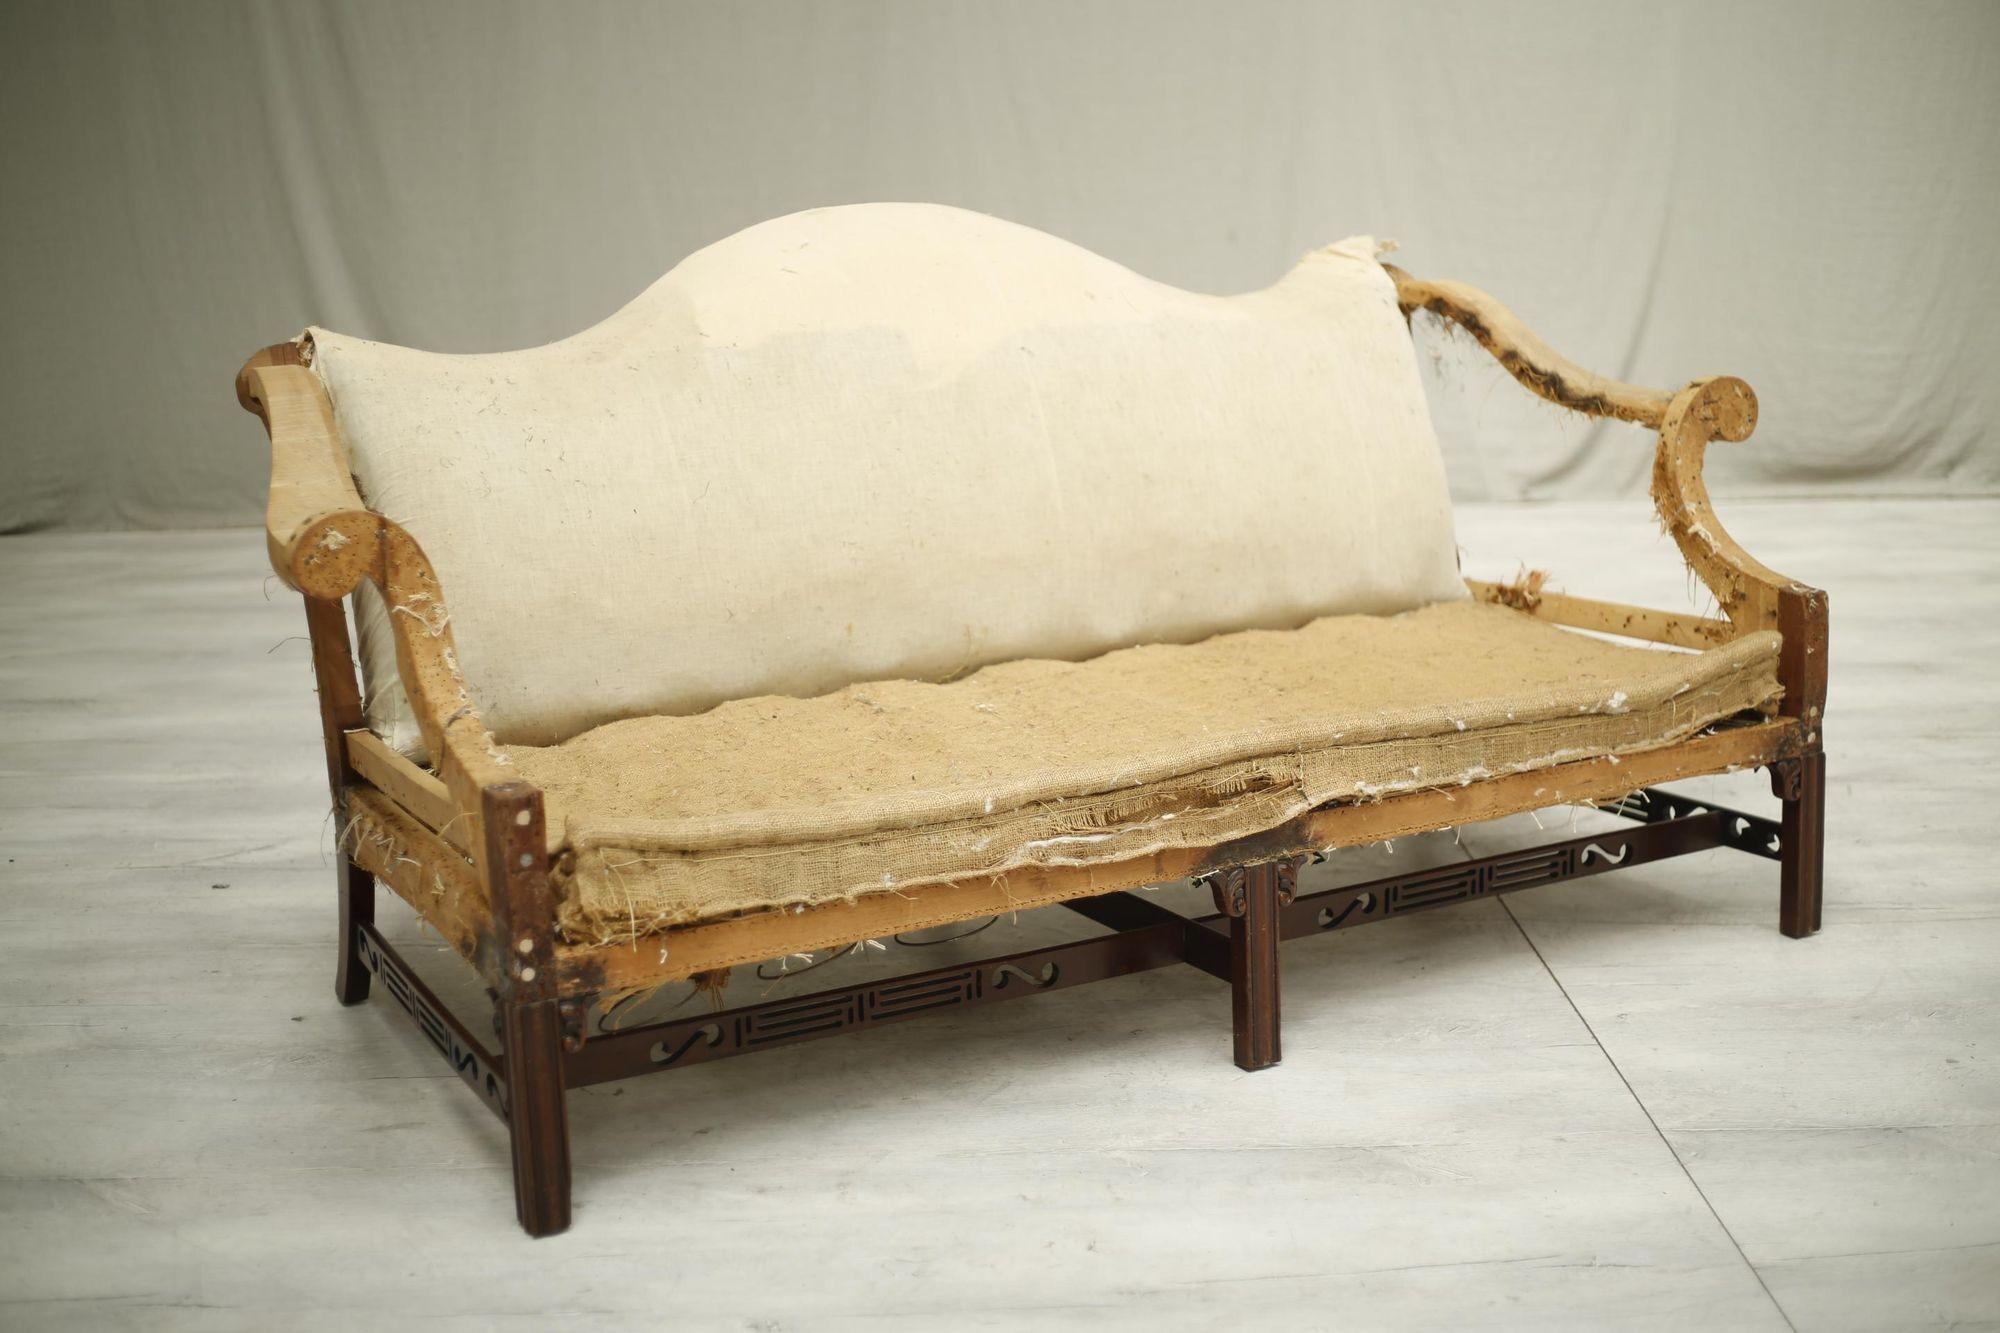 This is an extremely elegant and very well made c.1930's American mahogany camel backed sofa with fret work stretchers. The quality is very high and its a design I have never seen before. The size is ideal for 3 people and we would suggest a single